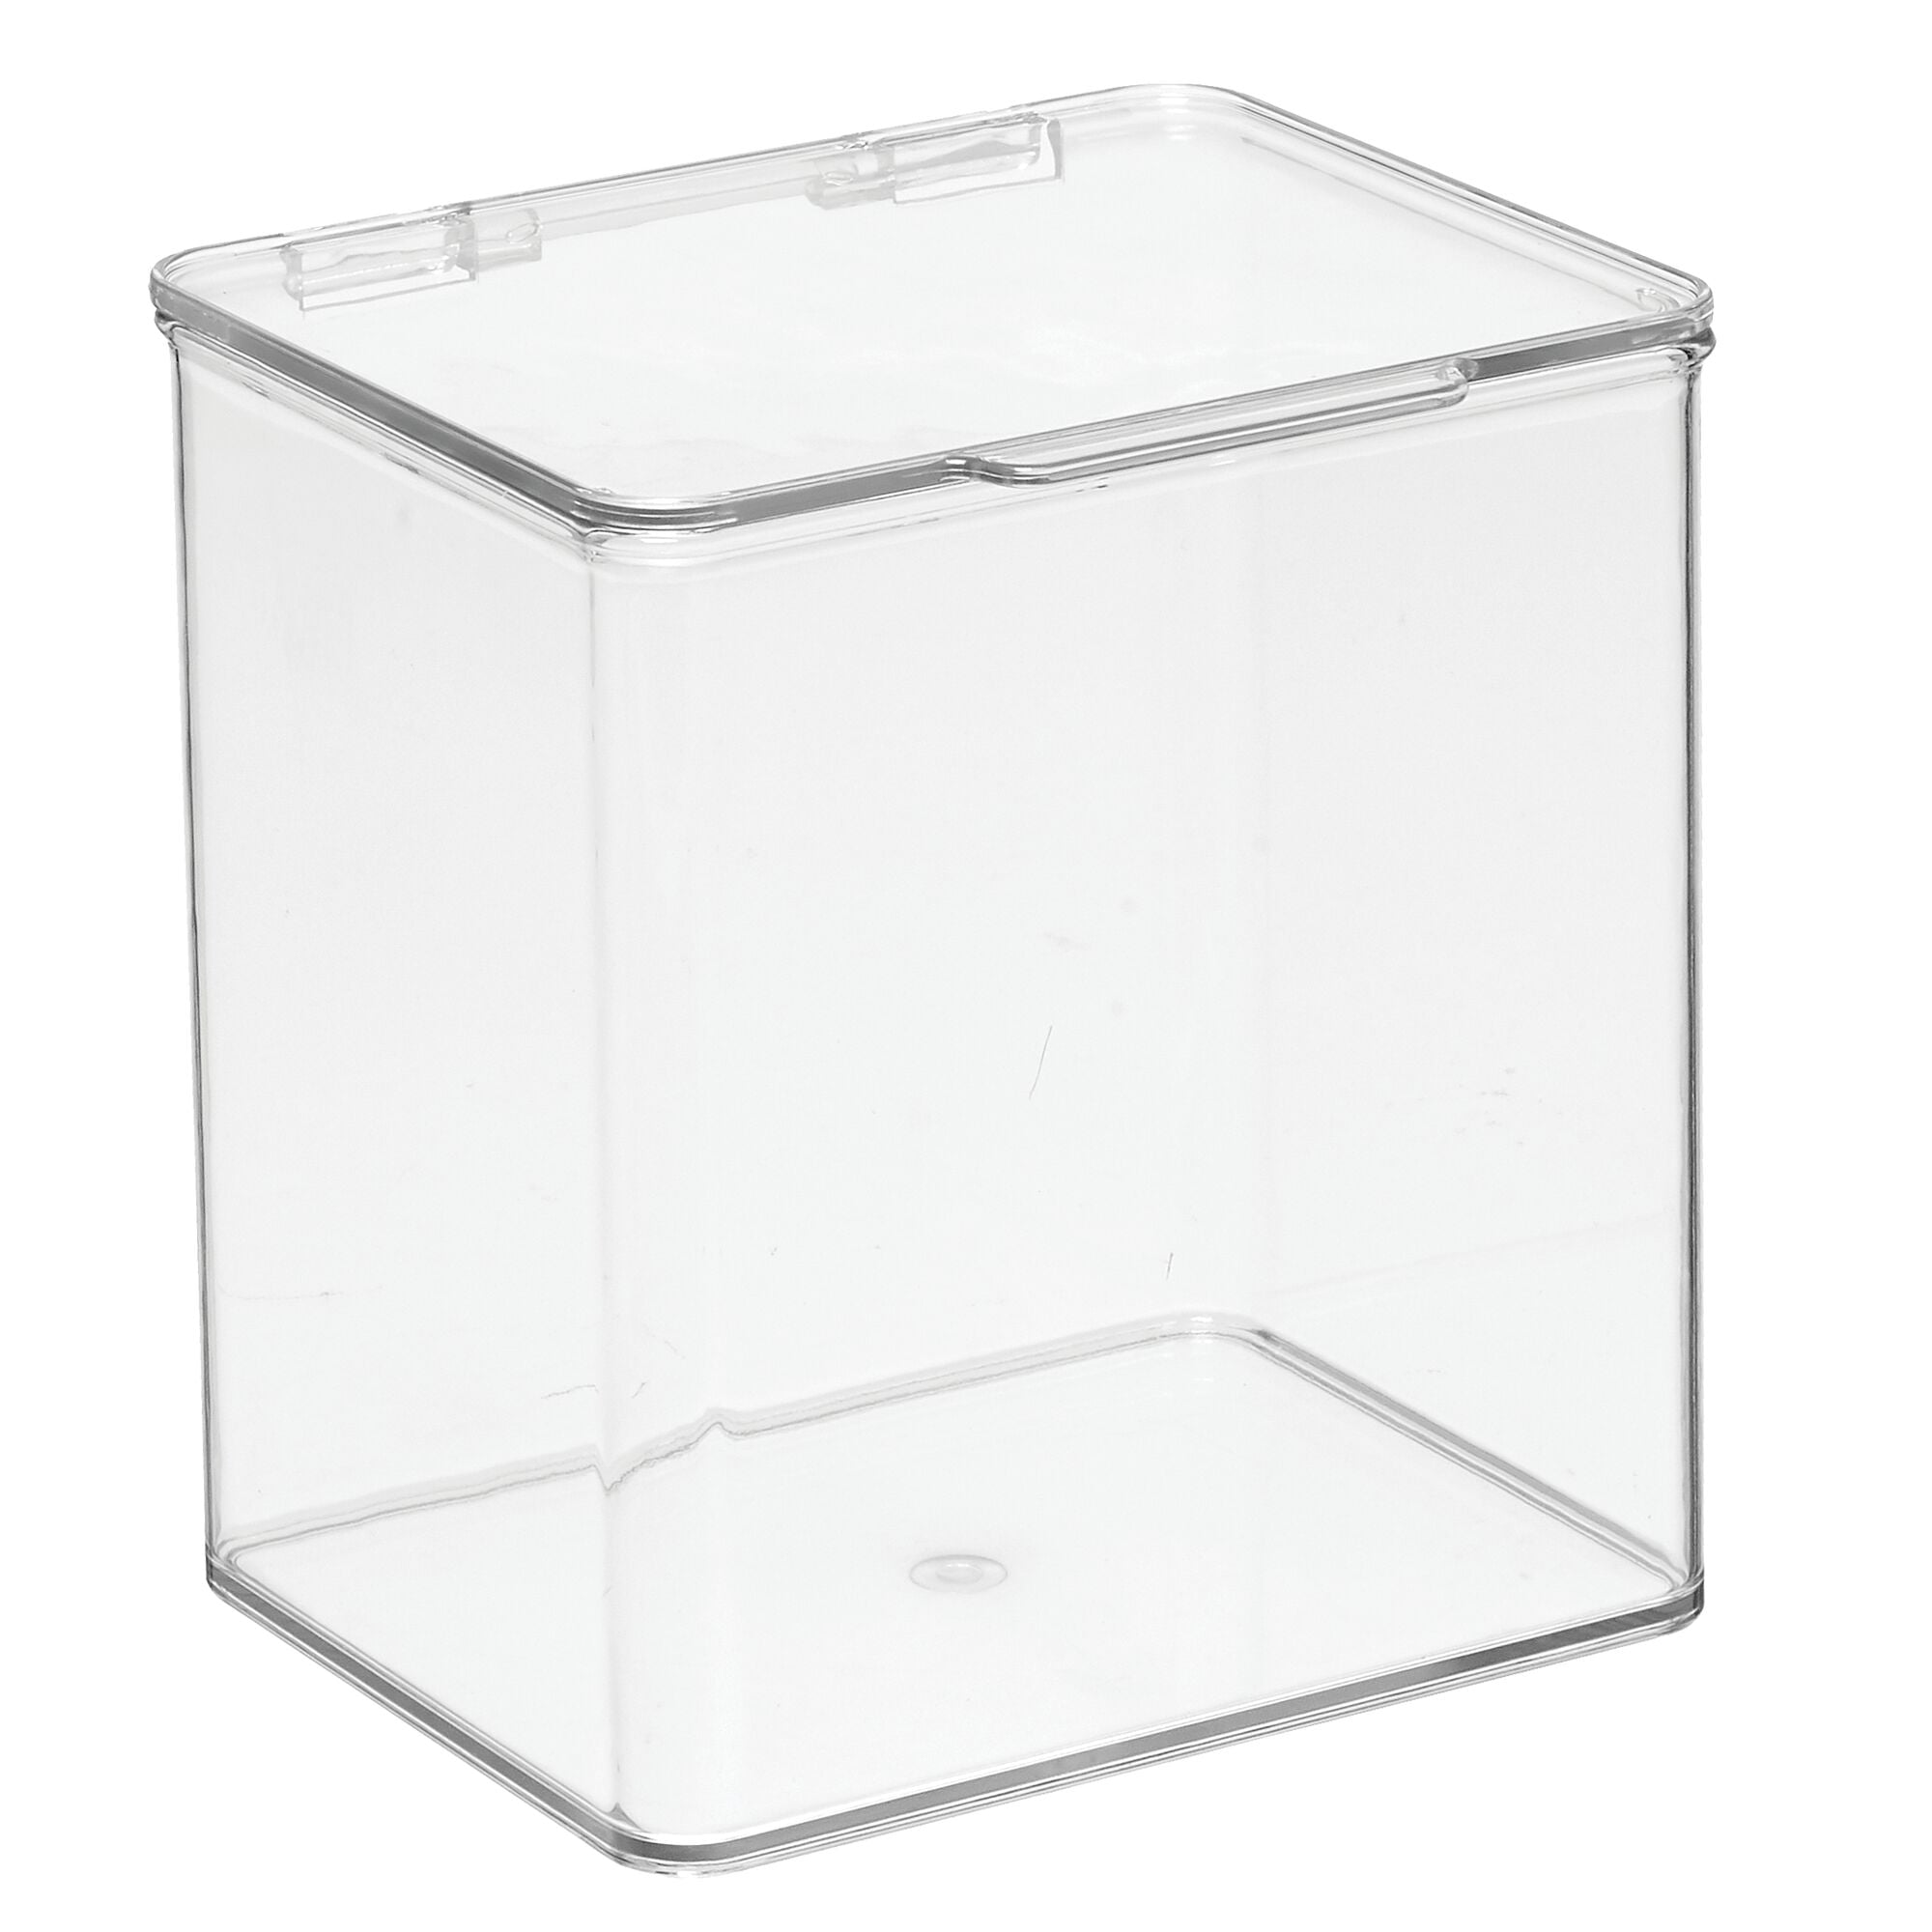 GUDEMAY Clear Stackable Plastic Storage Bins with Magnetic Lid